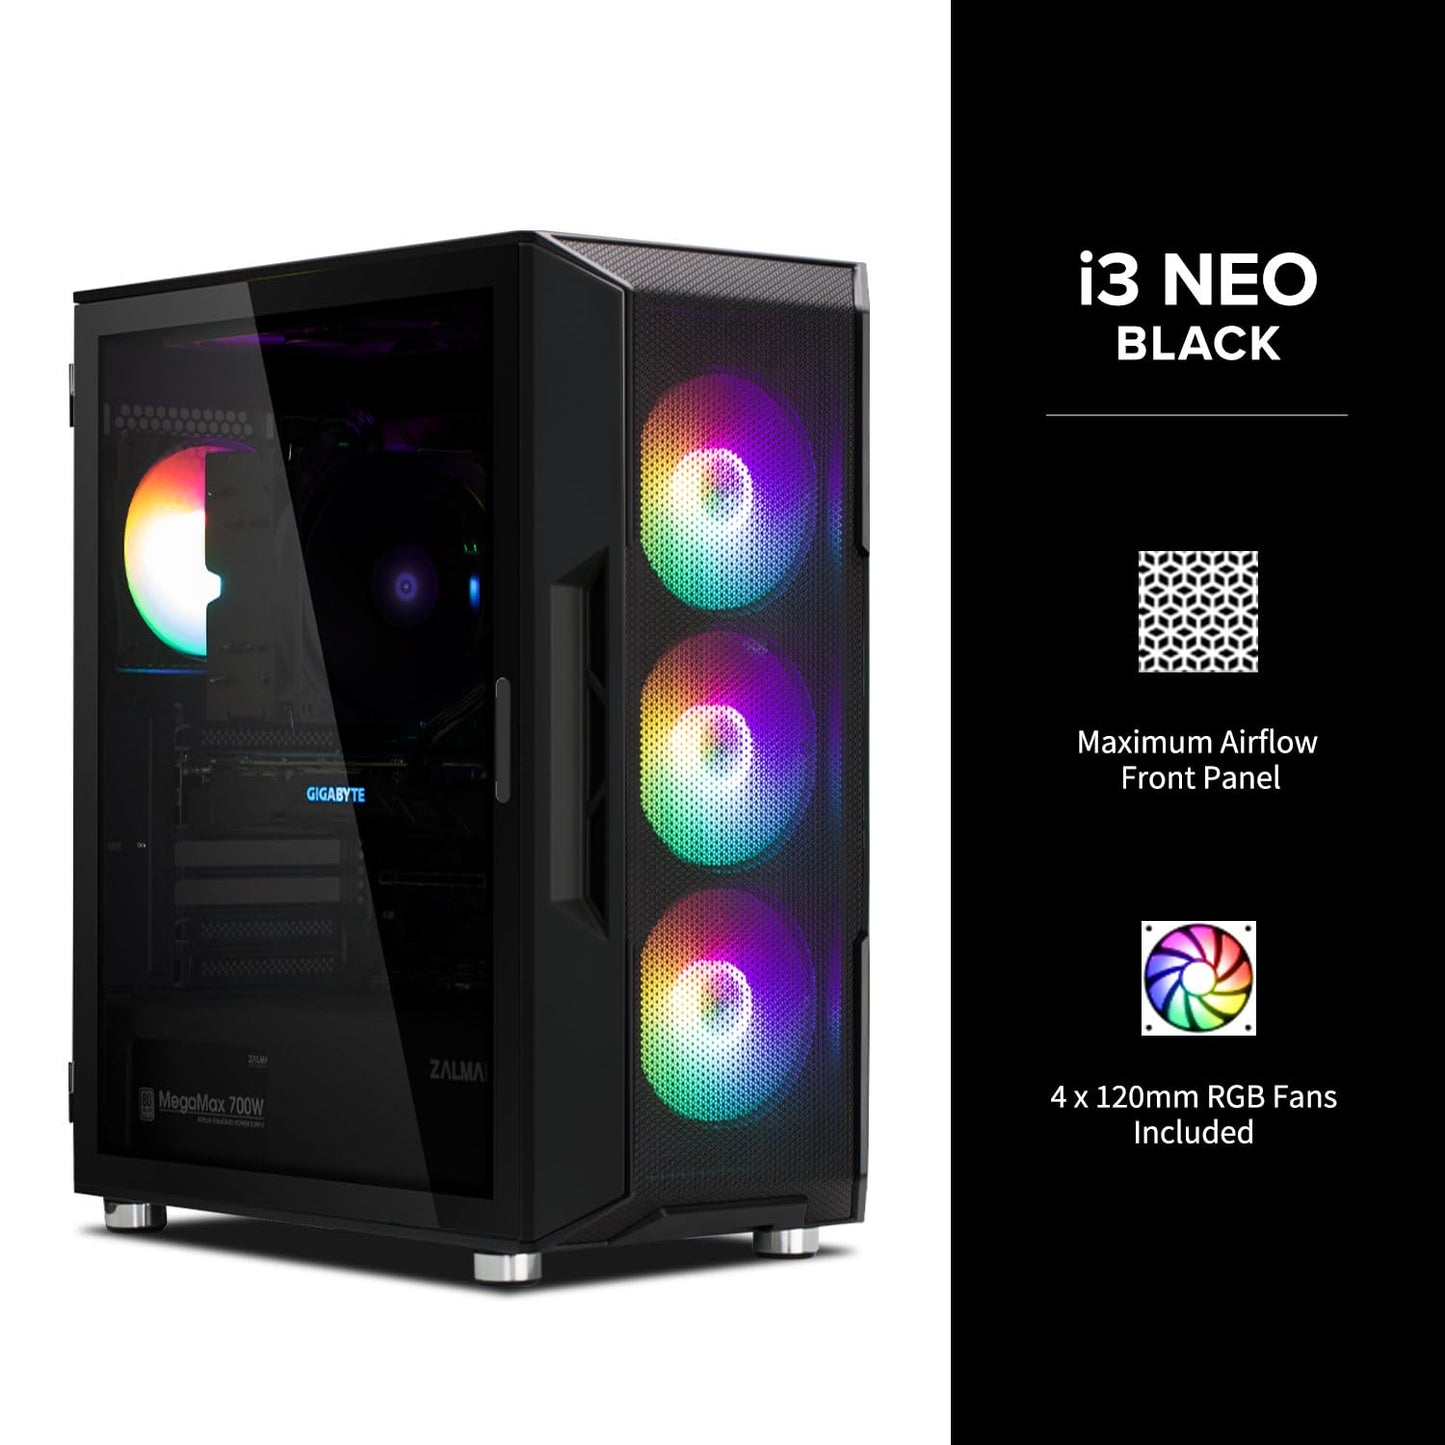 Zalman i3 NEO ATX Mid Tower Gaming PC Case - 4 x 120mm Fixed RGB Fans Preinstalled - Mesh Front Panel for High Airflow - Tempered Glass Side Panel, Black